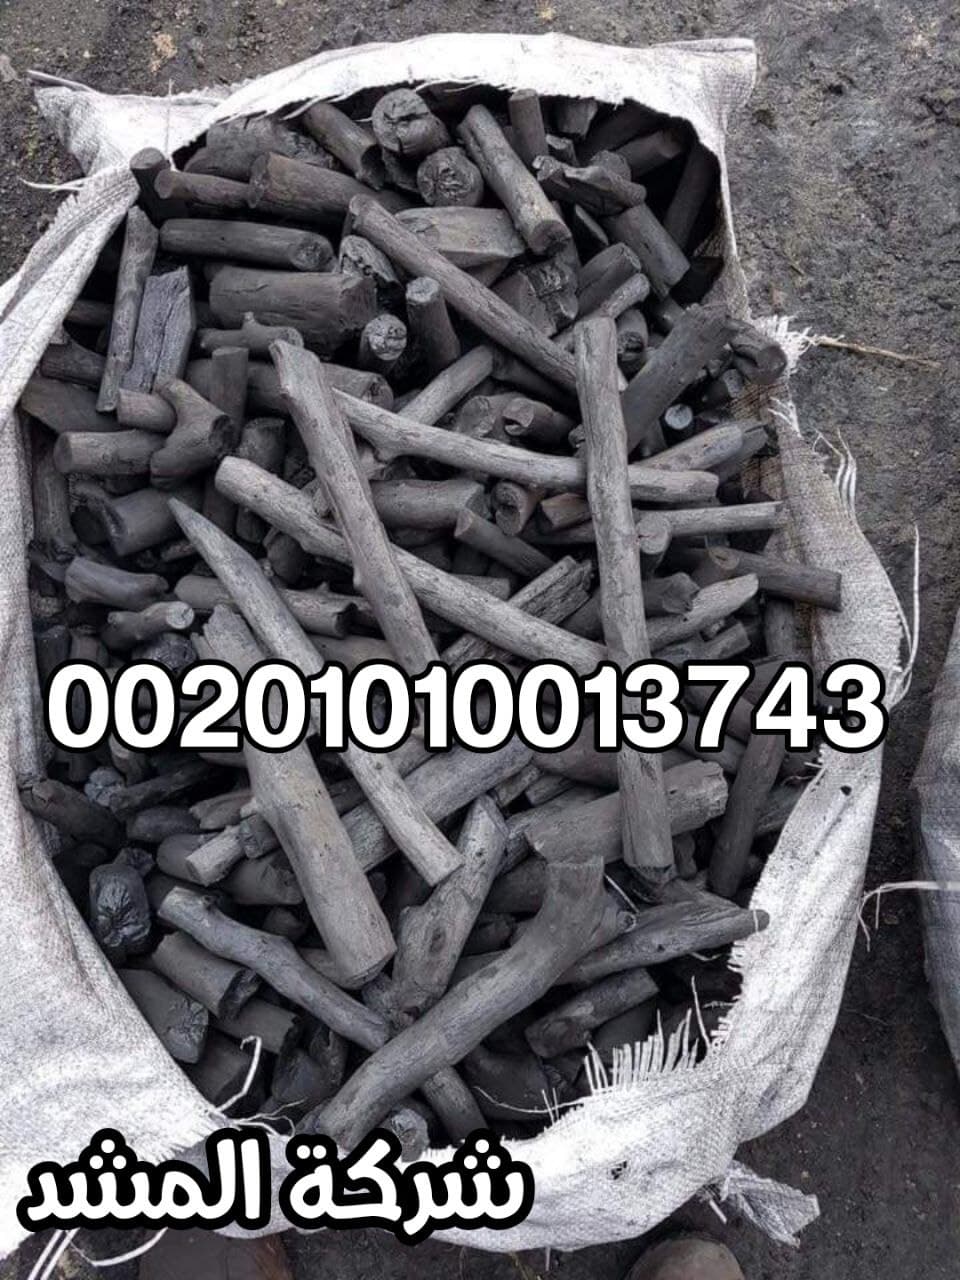 company-export-charcoal-in-egypt